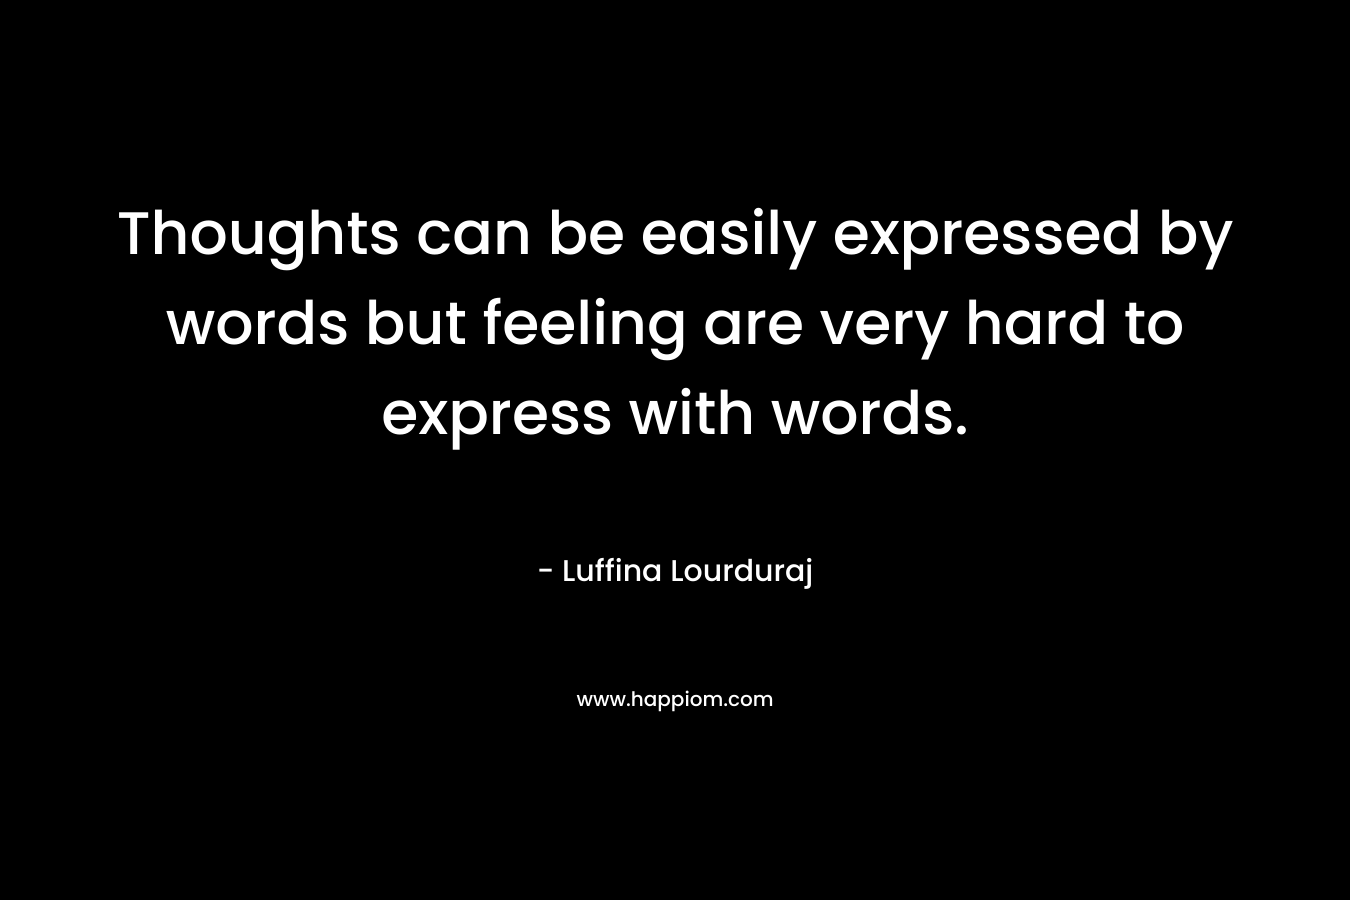 Thoughts can be easily expressed by words but feeling are very hard to express with words.